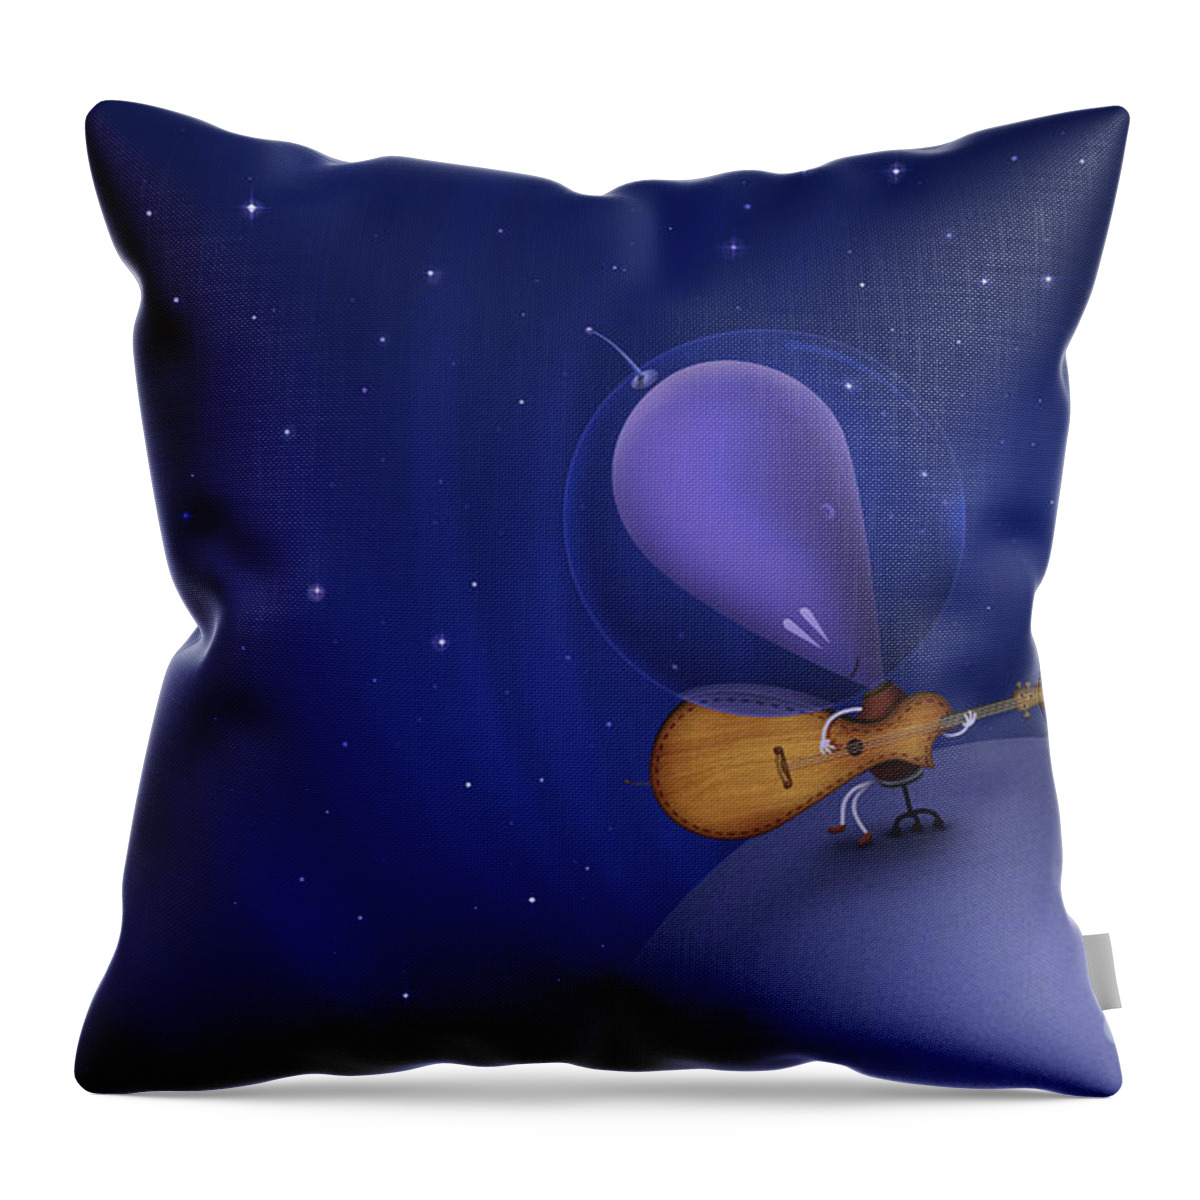 Space Throw Pillow featuring the digital art Illustration Of A Martian Playing by Vlad Gerasimov